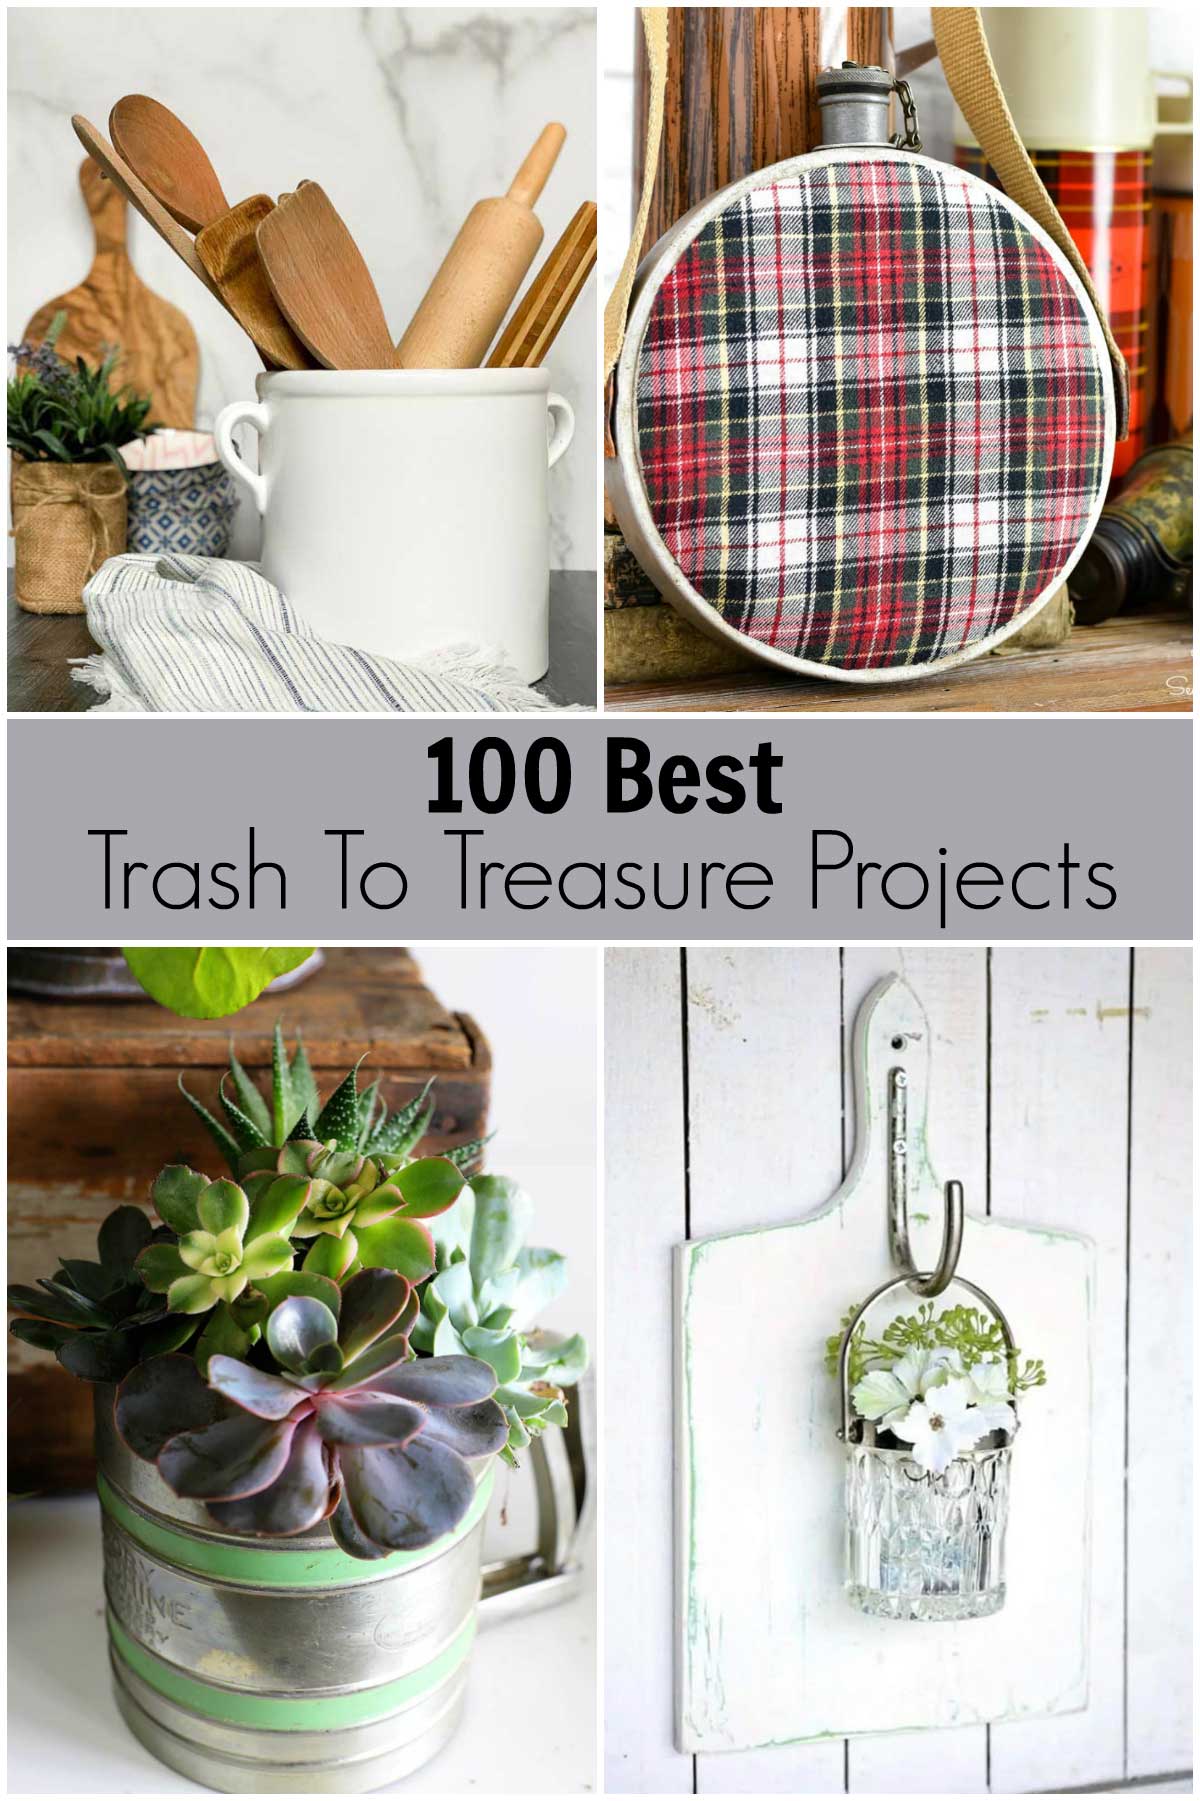 100 best trash to treasure projects - upcycling